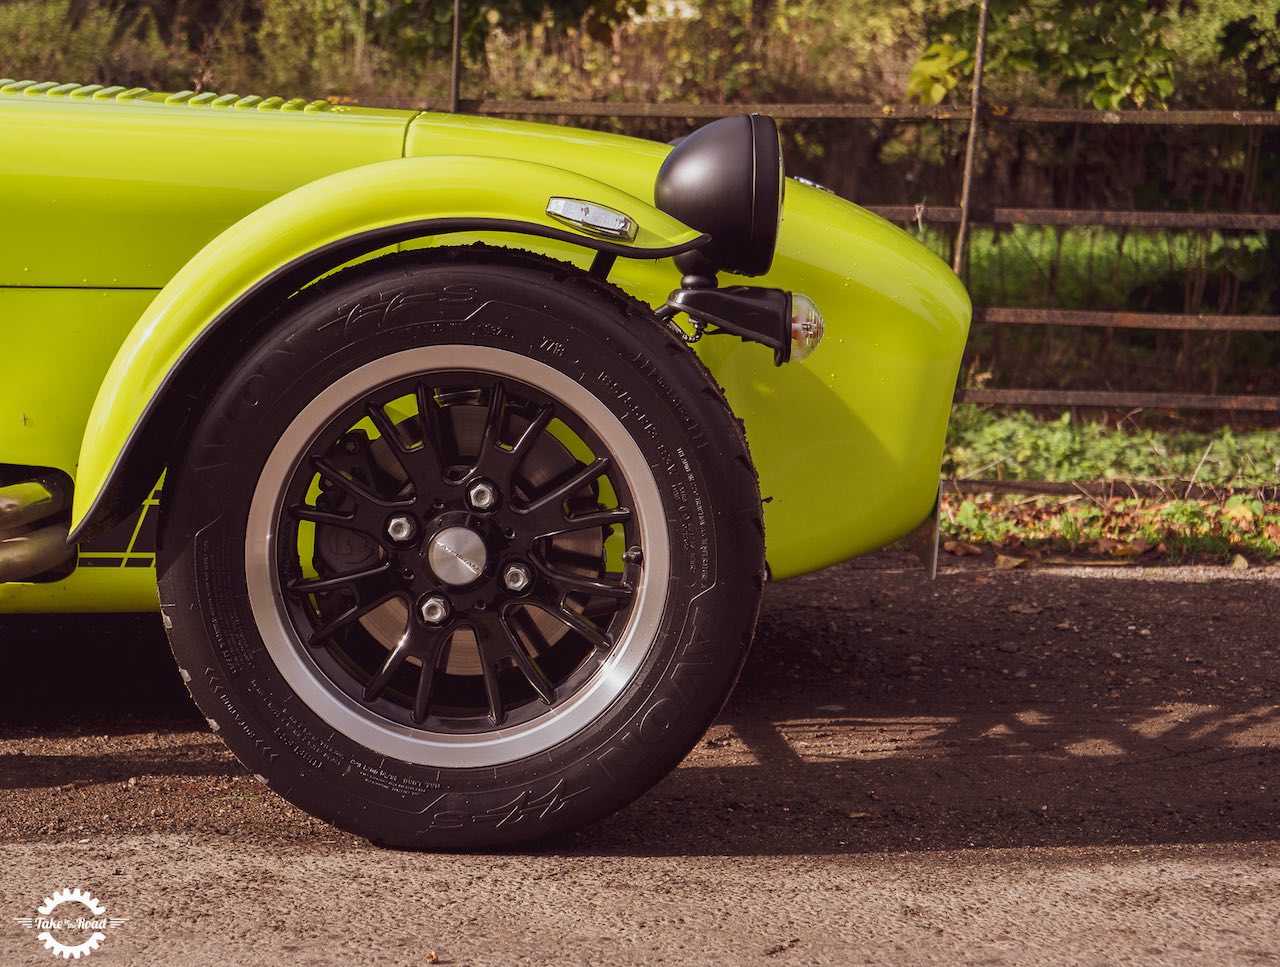 Hands on with the Caterham 270R